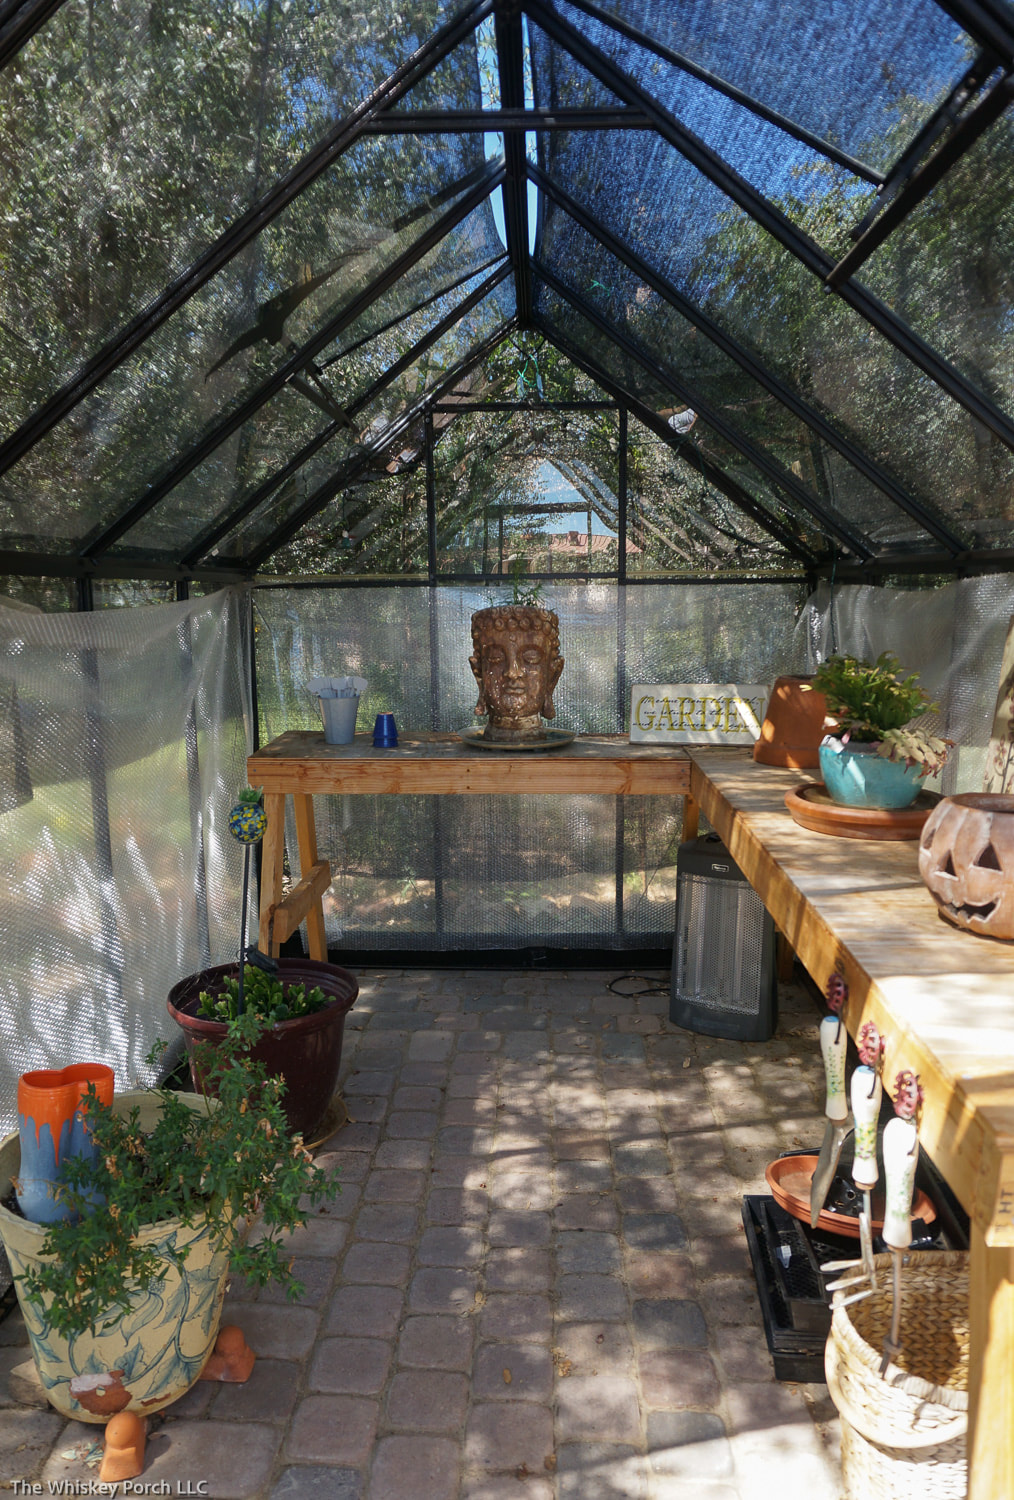 A large buddah sculpture sits at the end of a small greenhouse